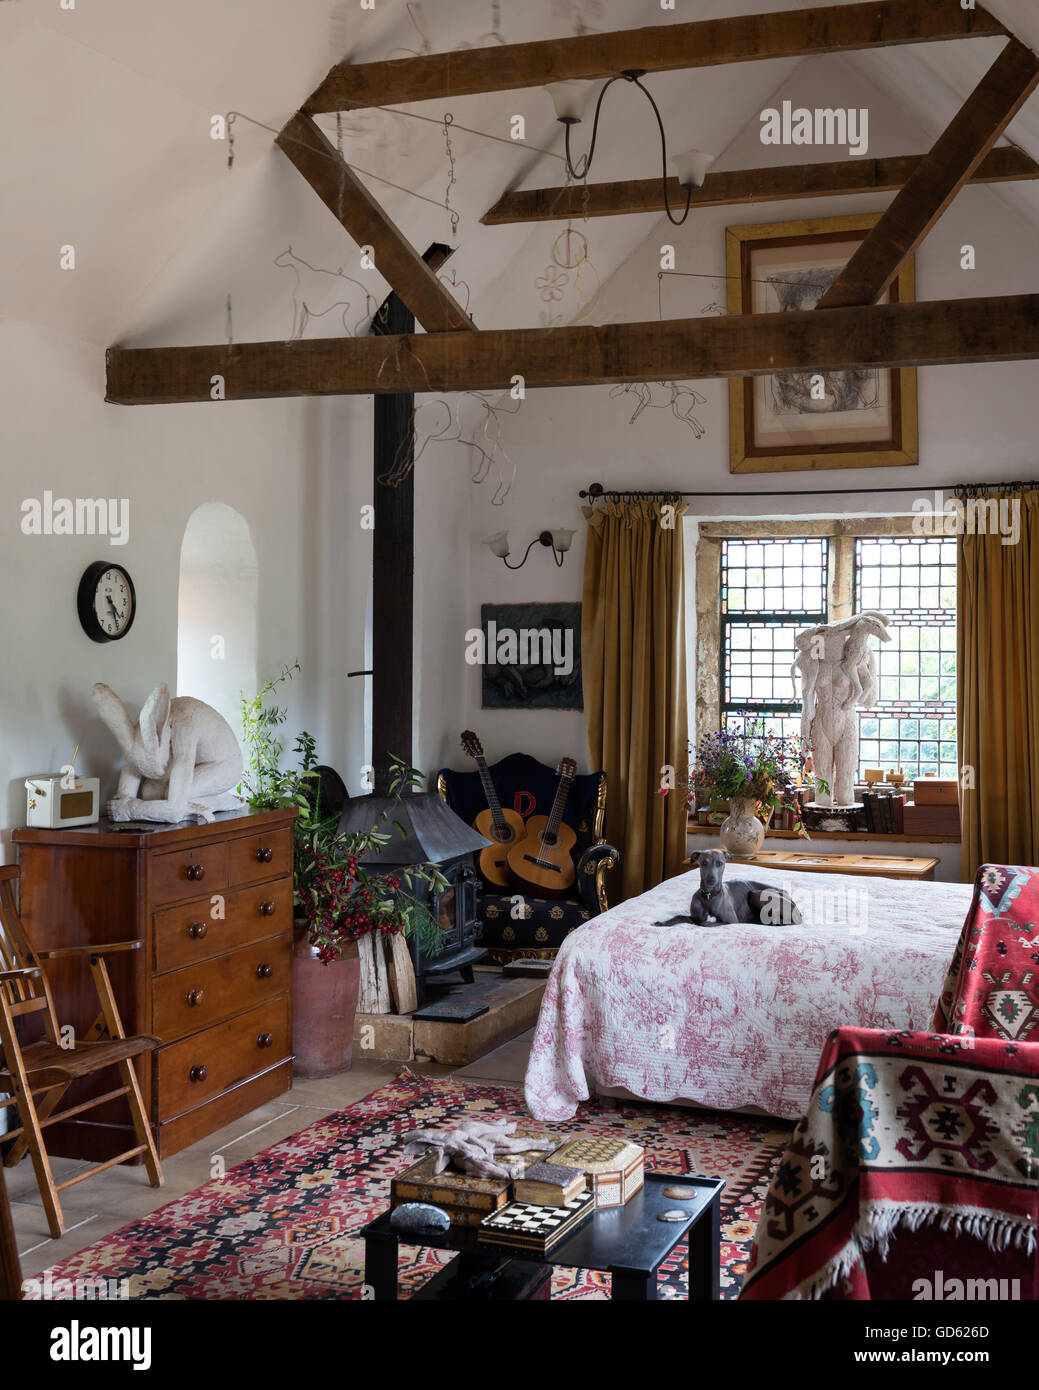 Bright kelim in airy bedroom with ceilings beams, woodburning stove and Sophie ryder sculptures Stock Photo